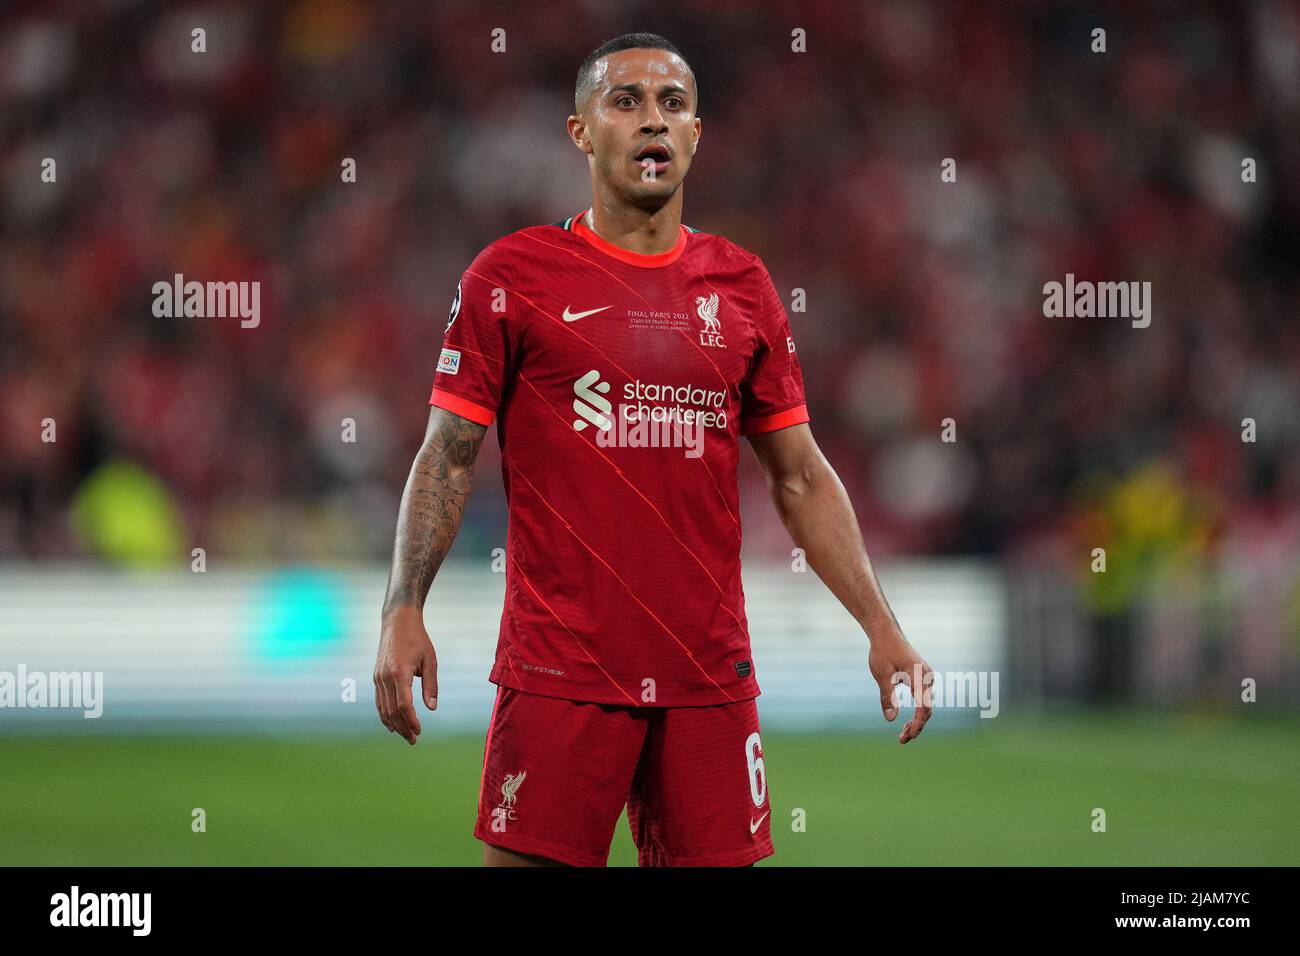 Thiago Alcantara of Liverpool FC during the UEFA Champions League Final match between Liverpool FC and Real Madrid played at Stade de France on May 28, 2022 in Paris, France. (Photo by Magma) Stock Photo